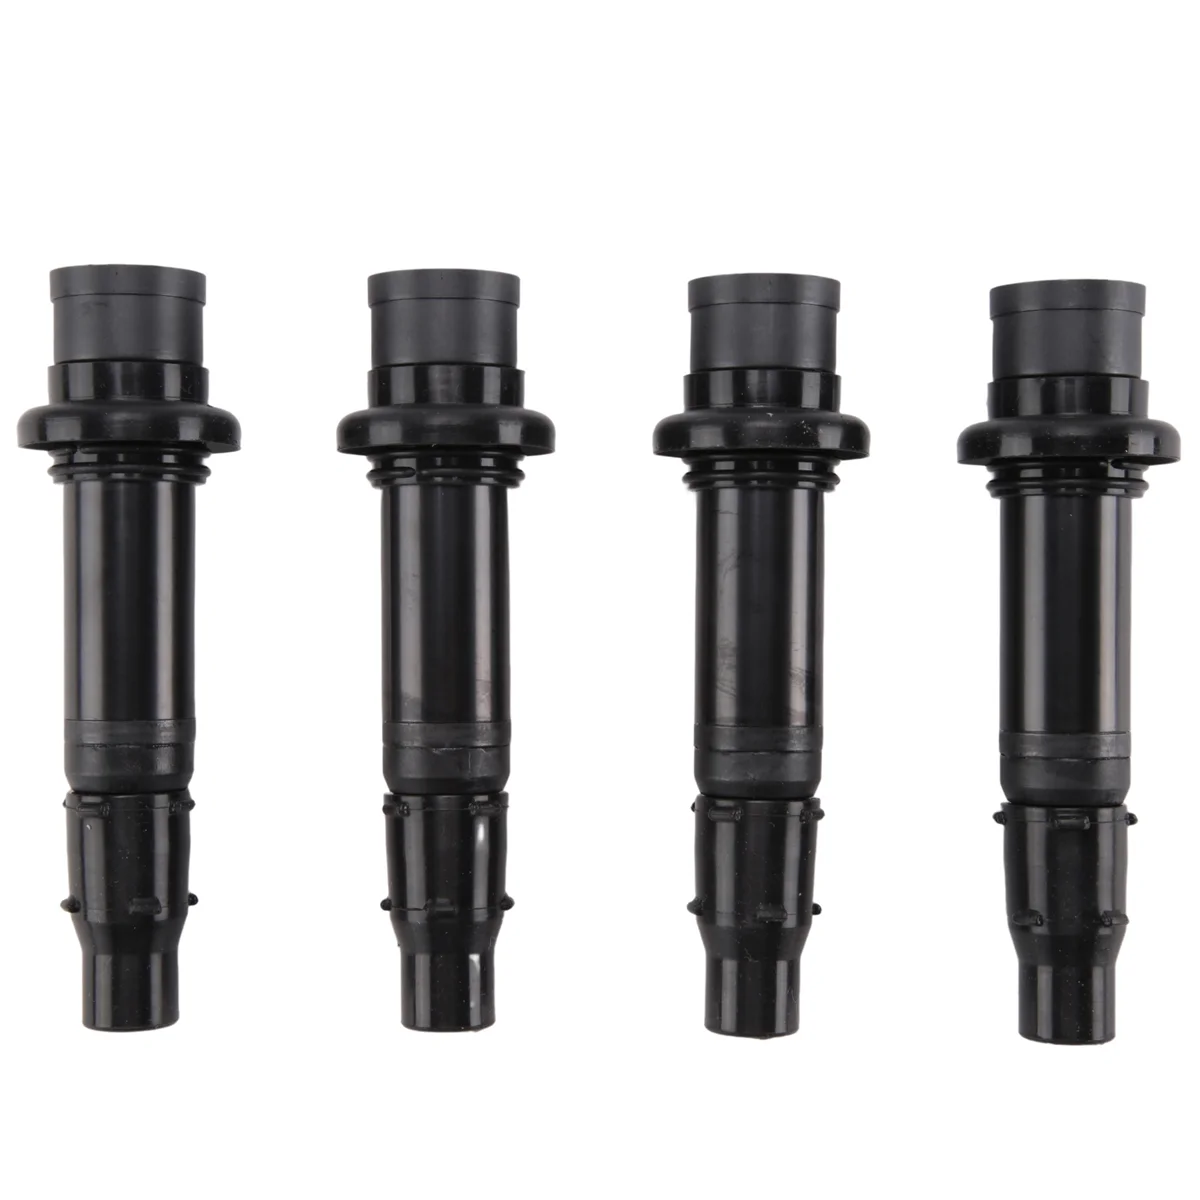 

Ignition Coil 5VY-82310-00-00 F6T558 for Yamaha YZF-R6 YZF-R6S YZF-R1 FZ1 Vmax 1700 FZS1 Motorcycle Accessories 4 Pack